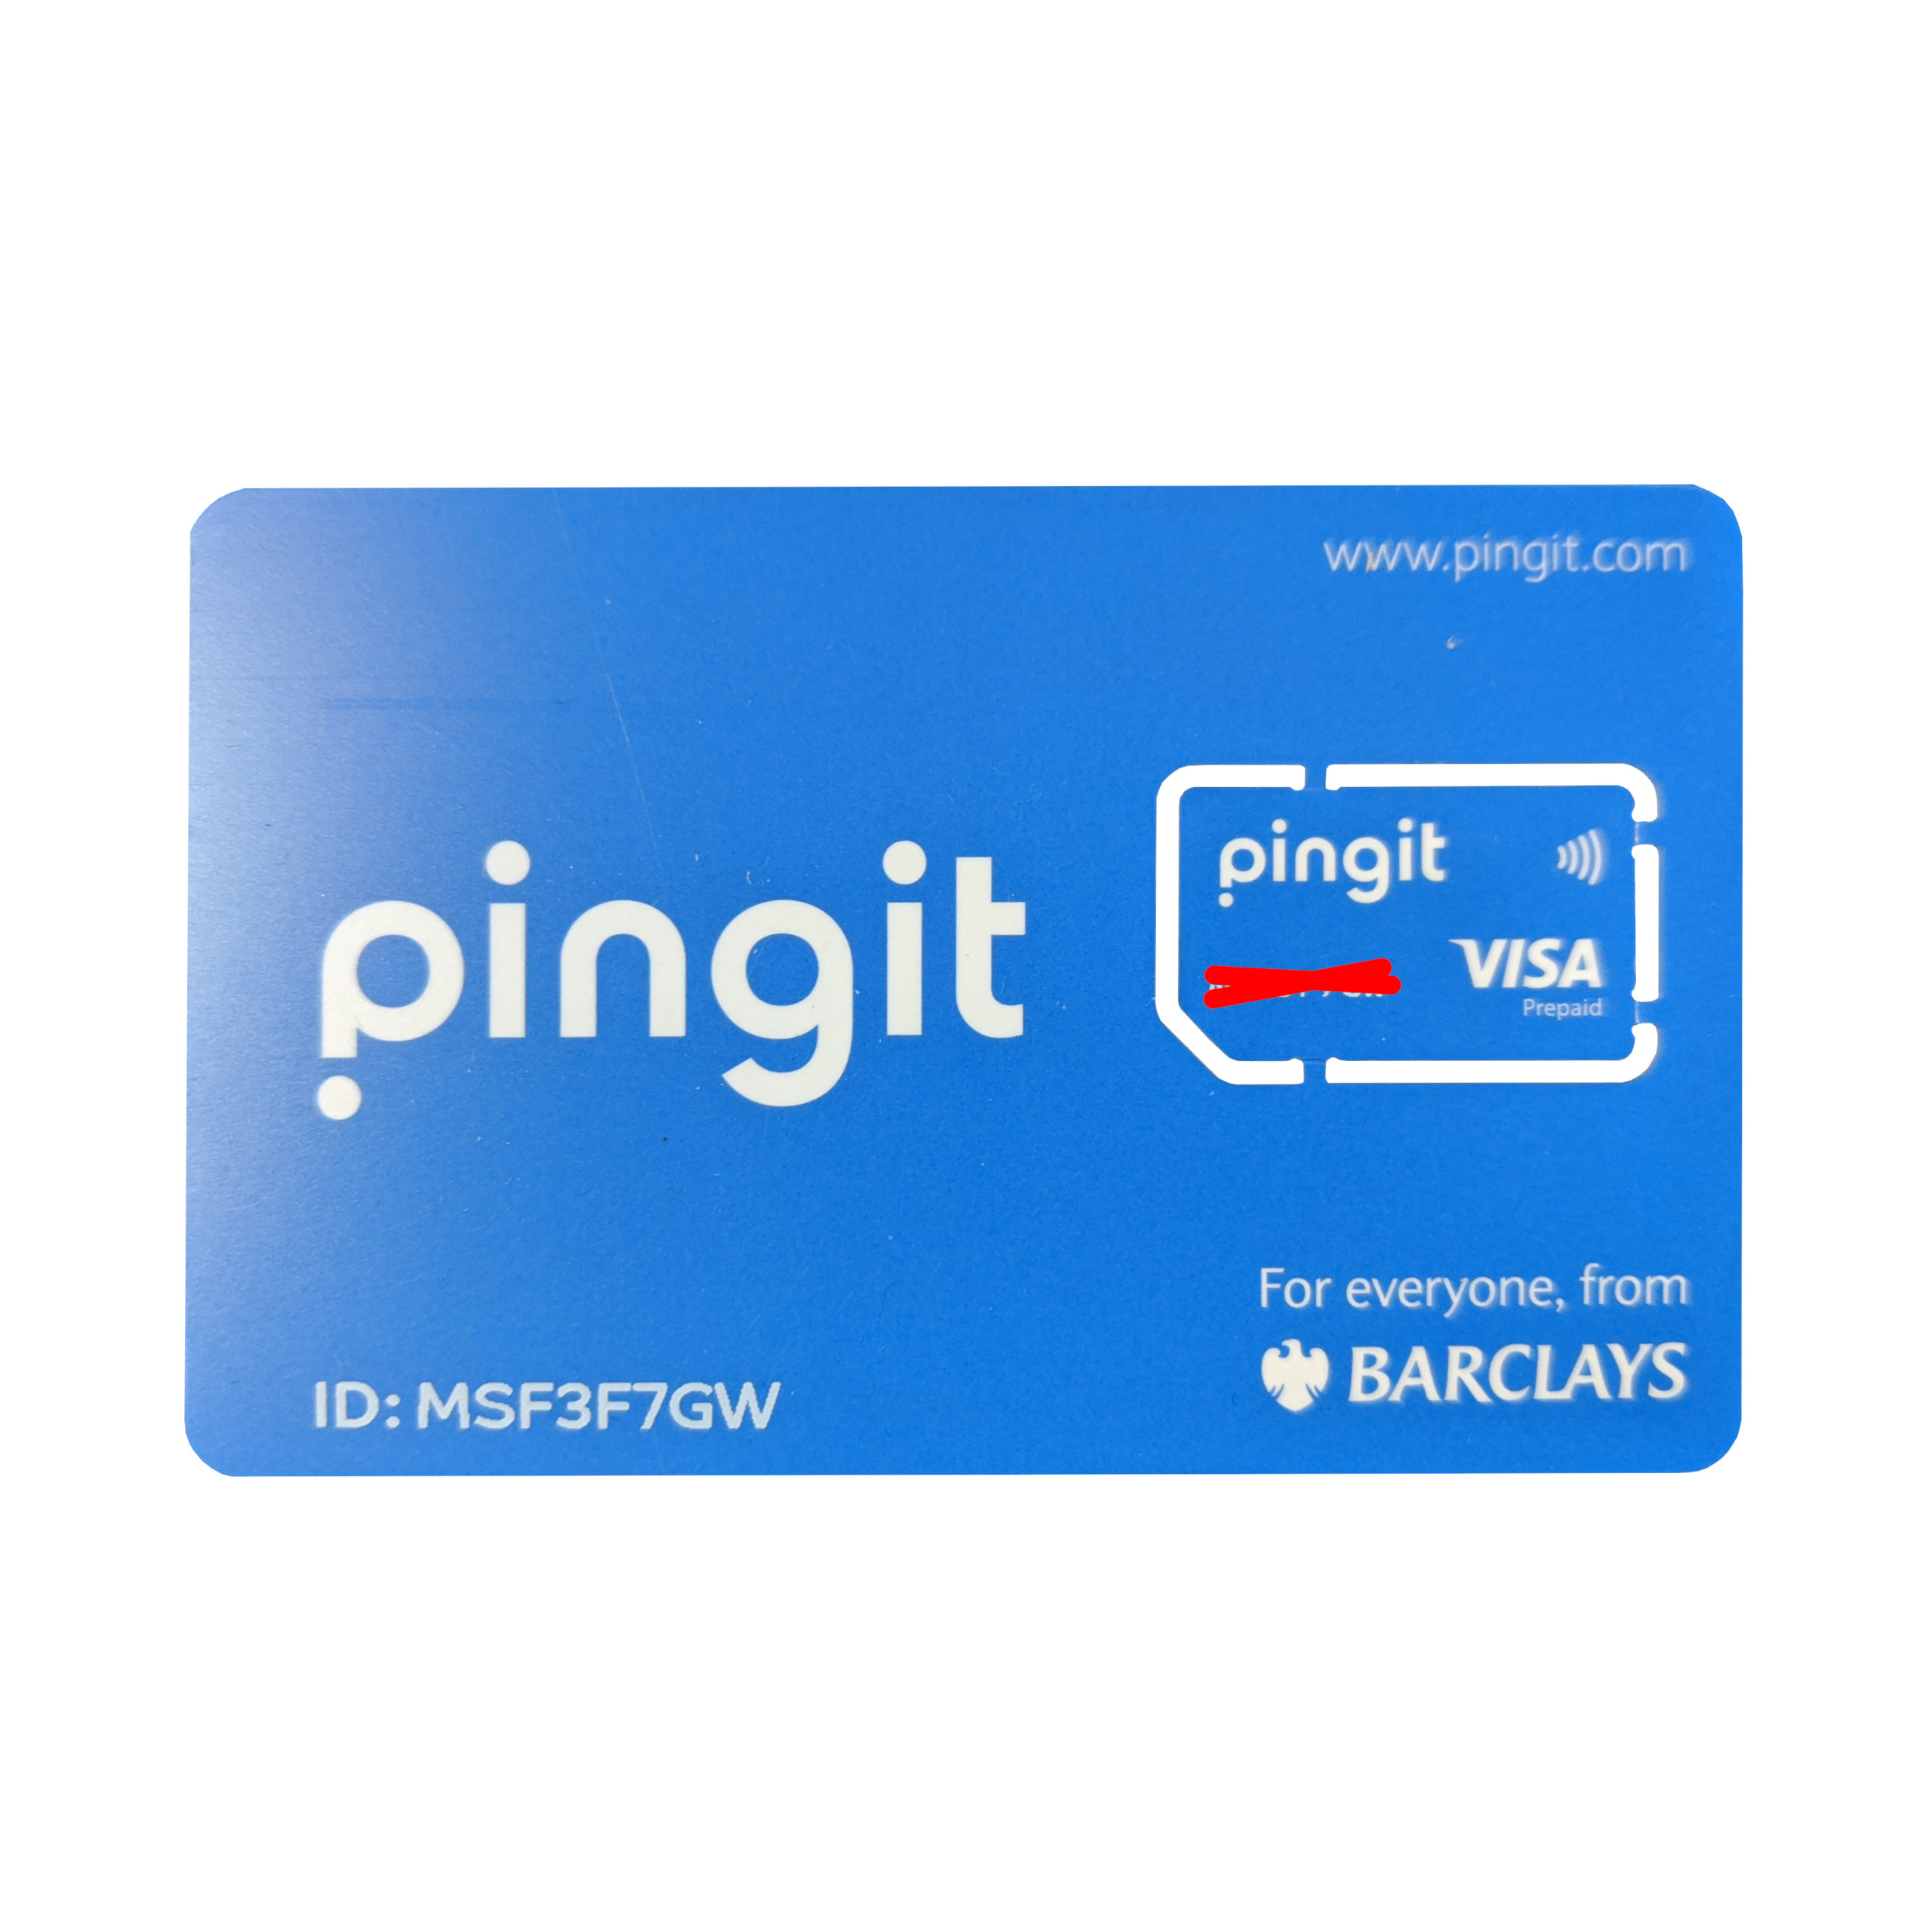 product_10191_pingit-full-card-front